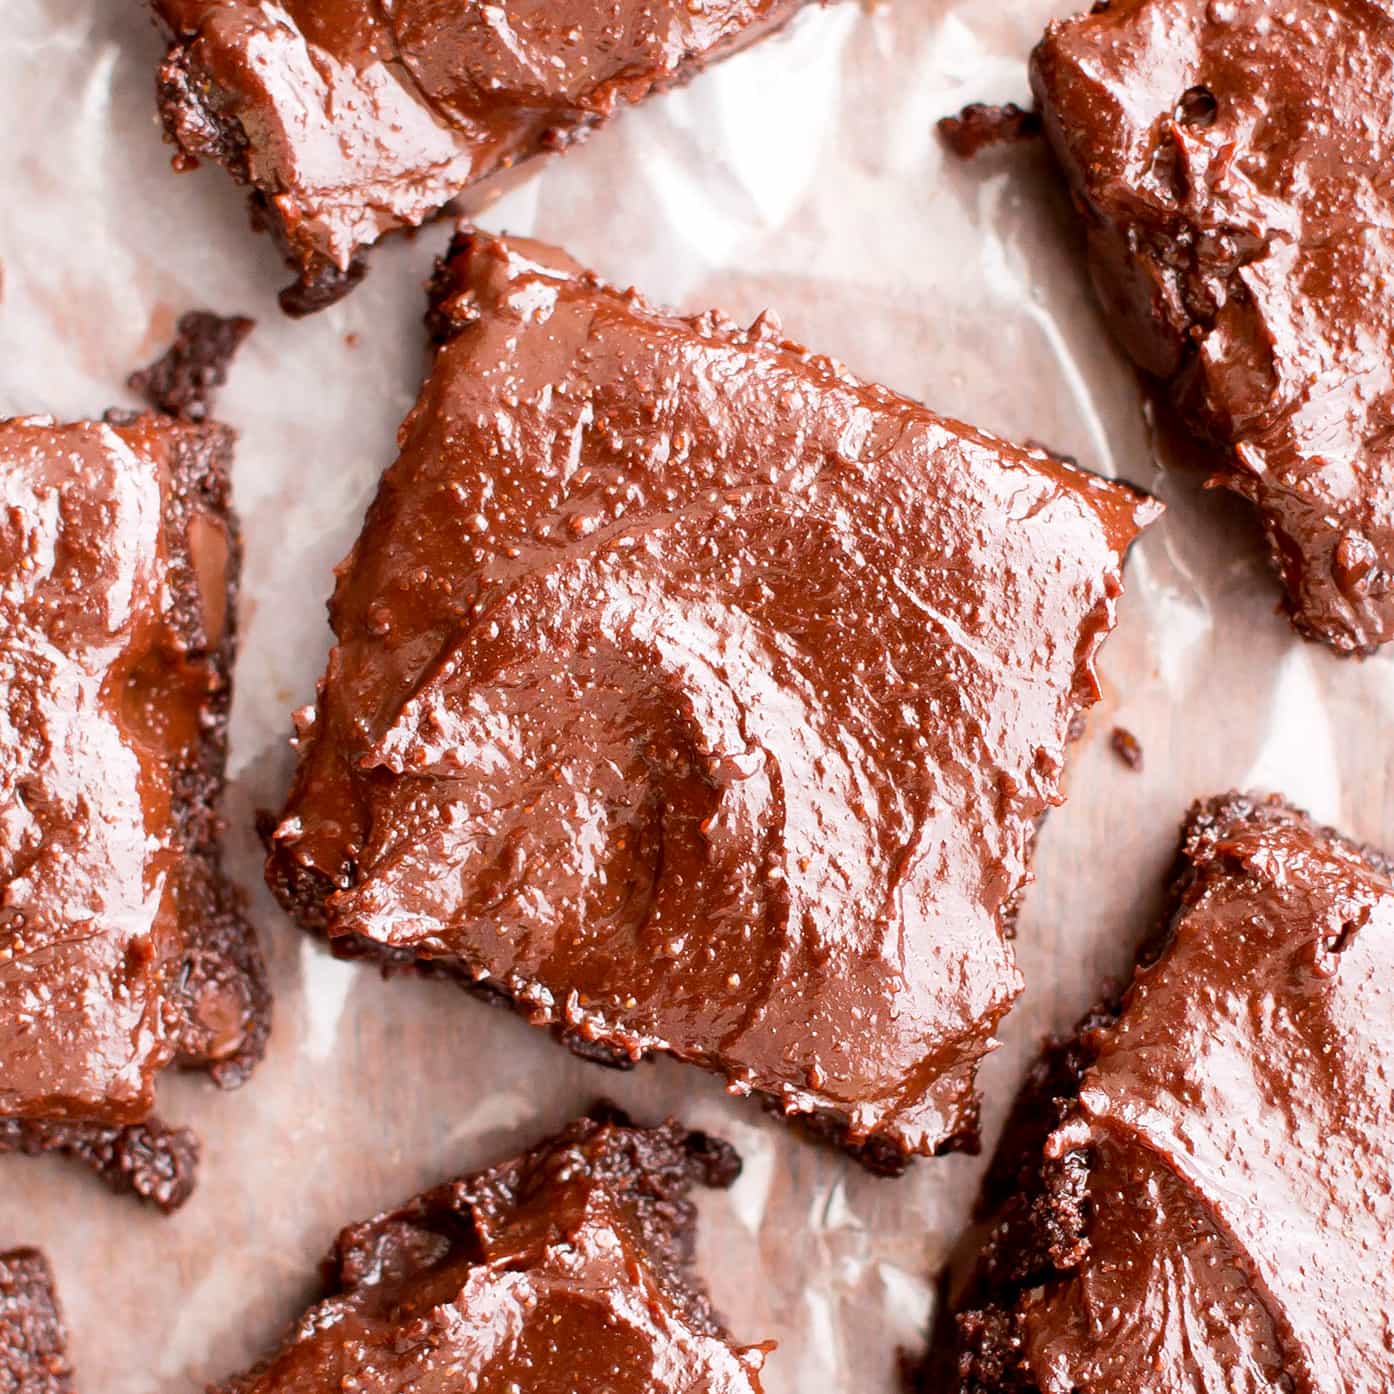 Chocolate Almond Butter Frosted Fudgy Paleo Brownies (Vegan, Gluten Free, Paleo)